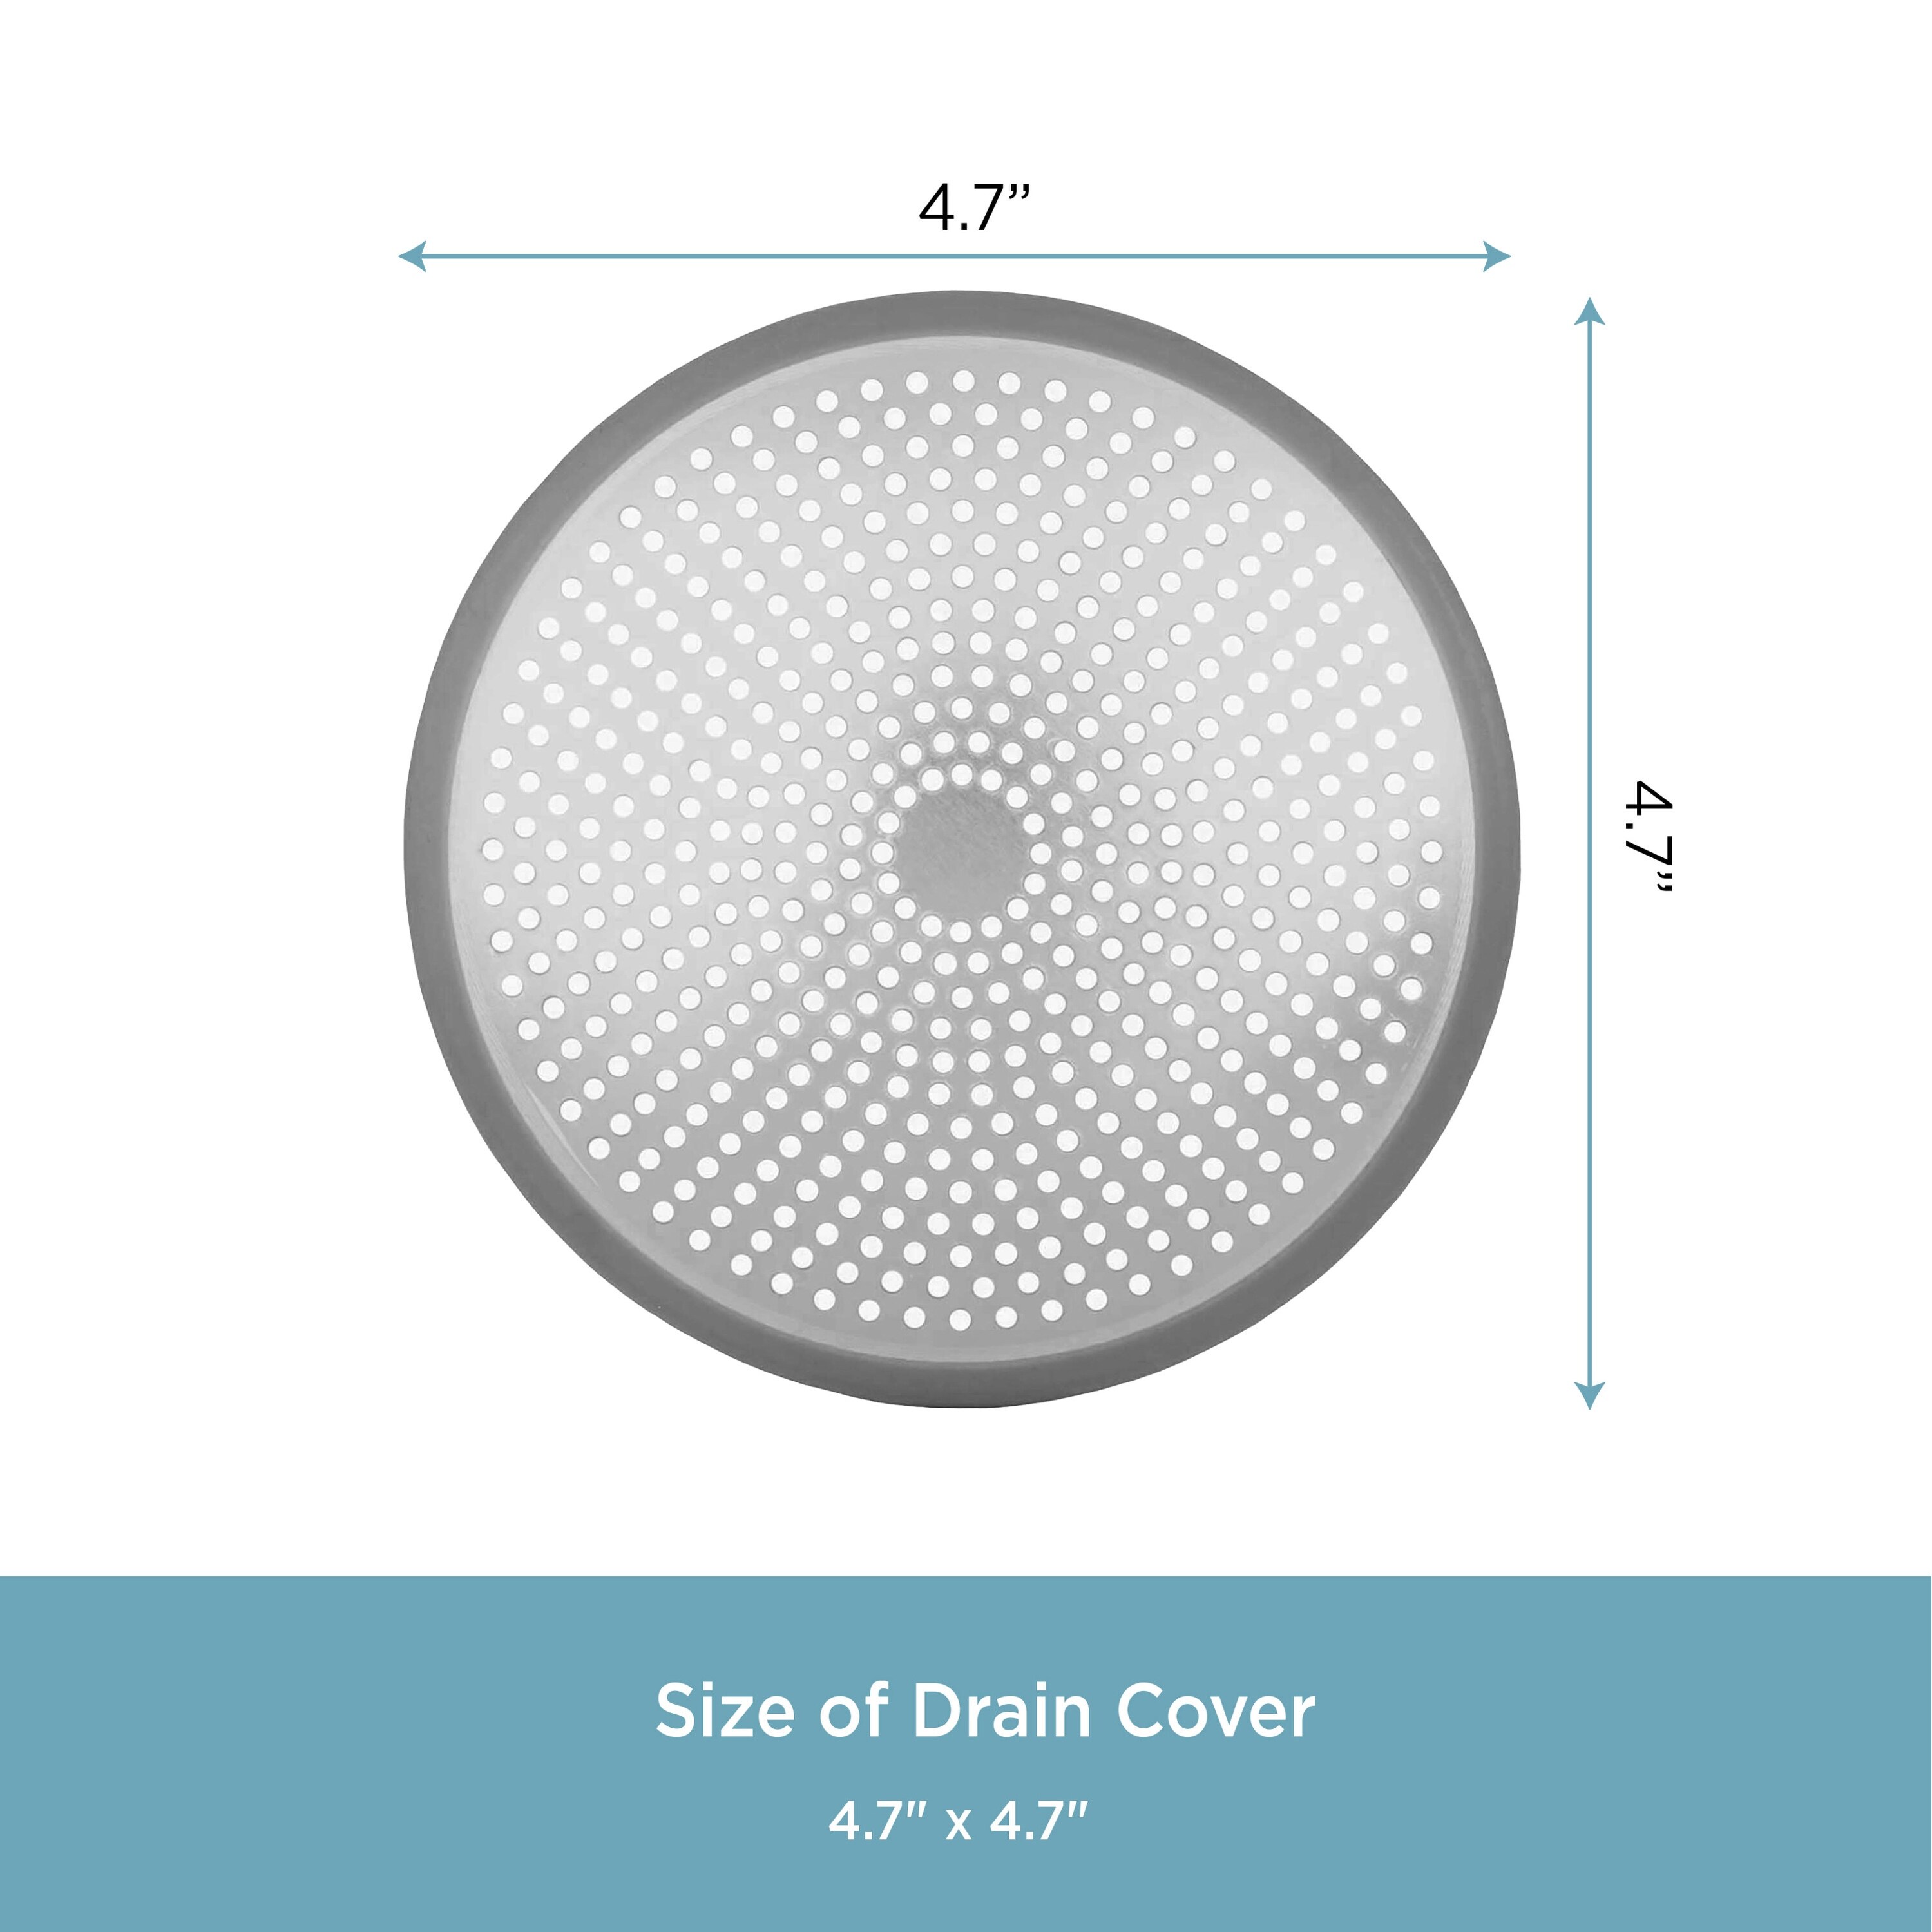 https://ak1.ostkcdn.com/images/products/is/images/direct/82ed16705143418b59e0a955f2b8d39fef46bd47/Kenney-Rust-Proof-Bathtub-and-Shower-Drain-Cover%2C-4.7%22-Diameter.jpg